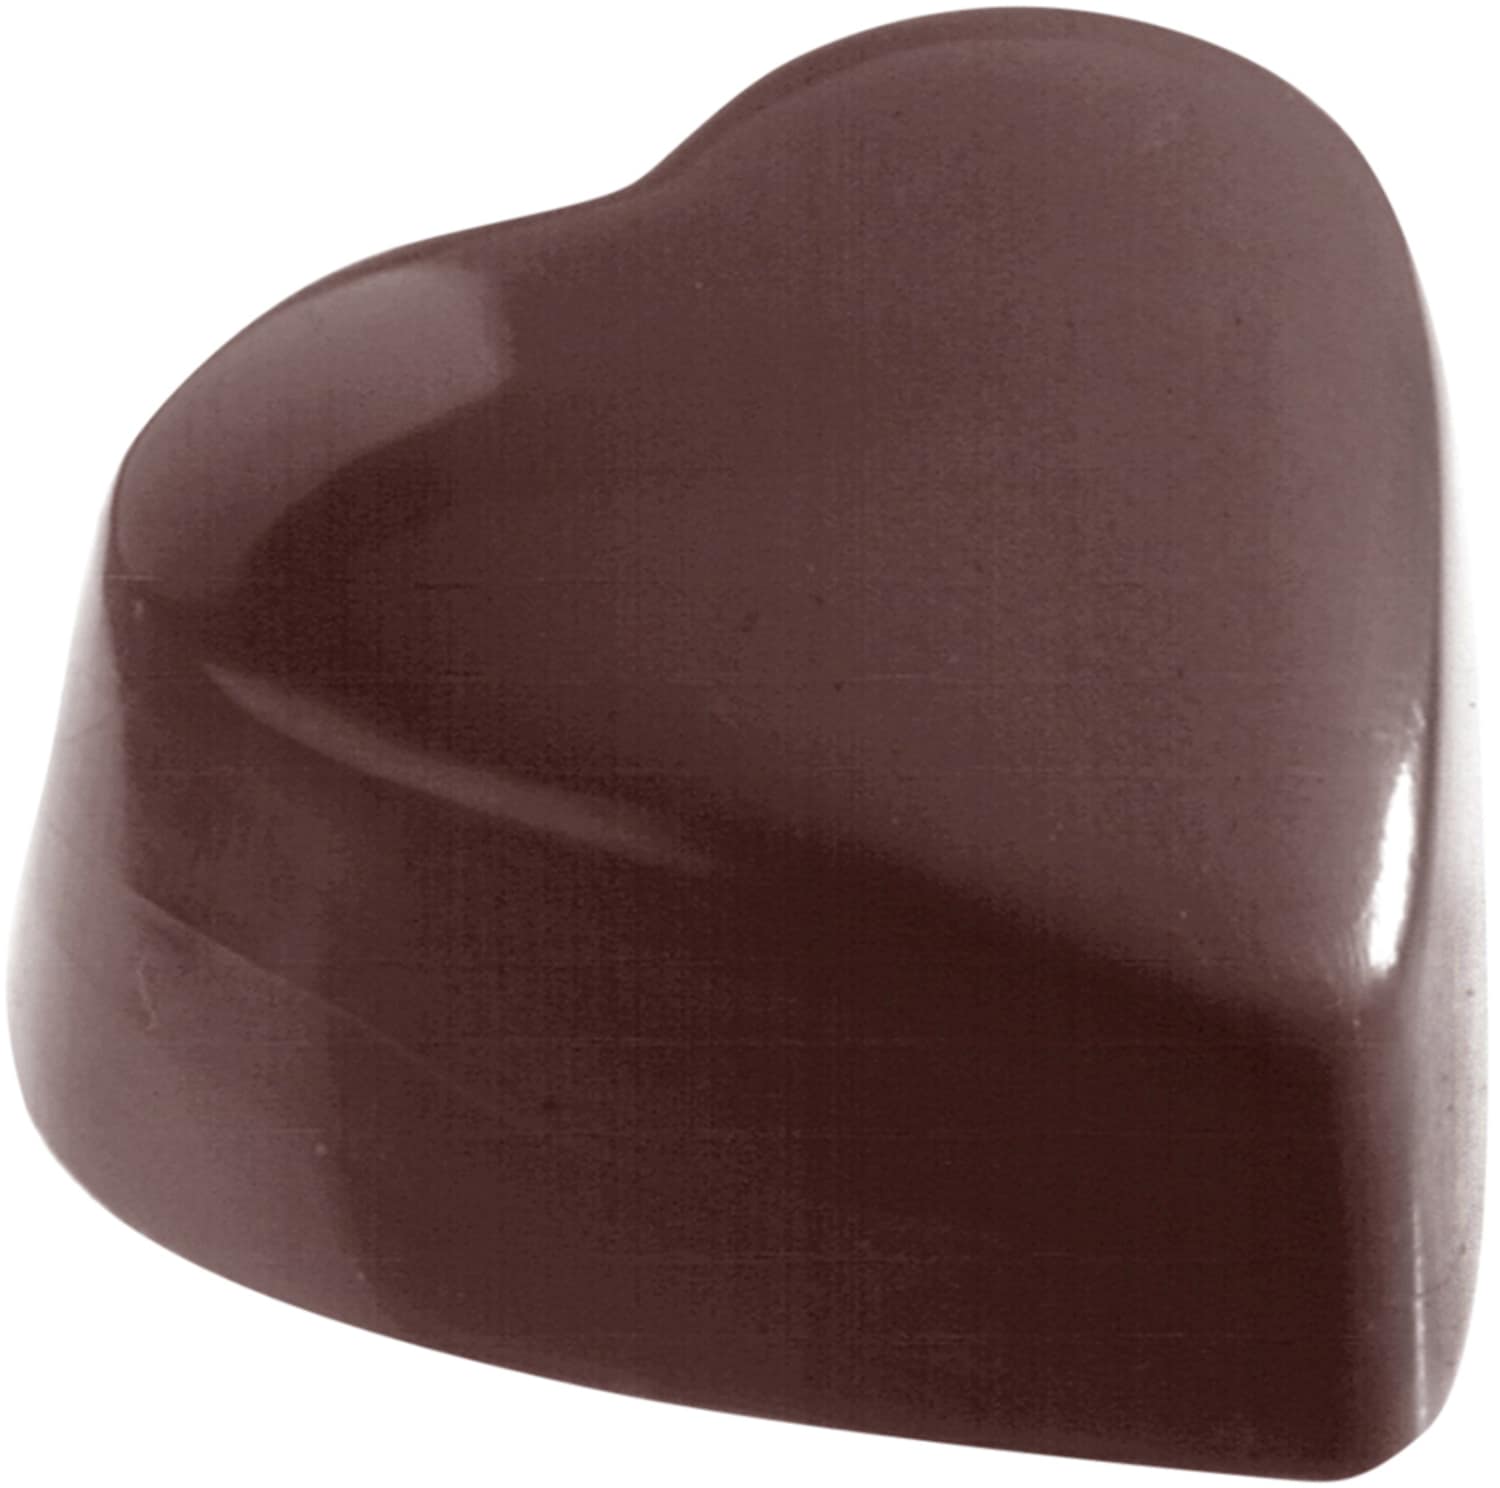 Chocolate mould "heart" 421214